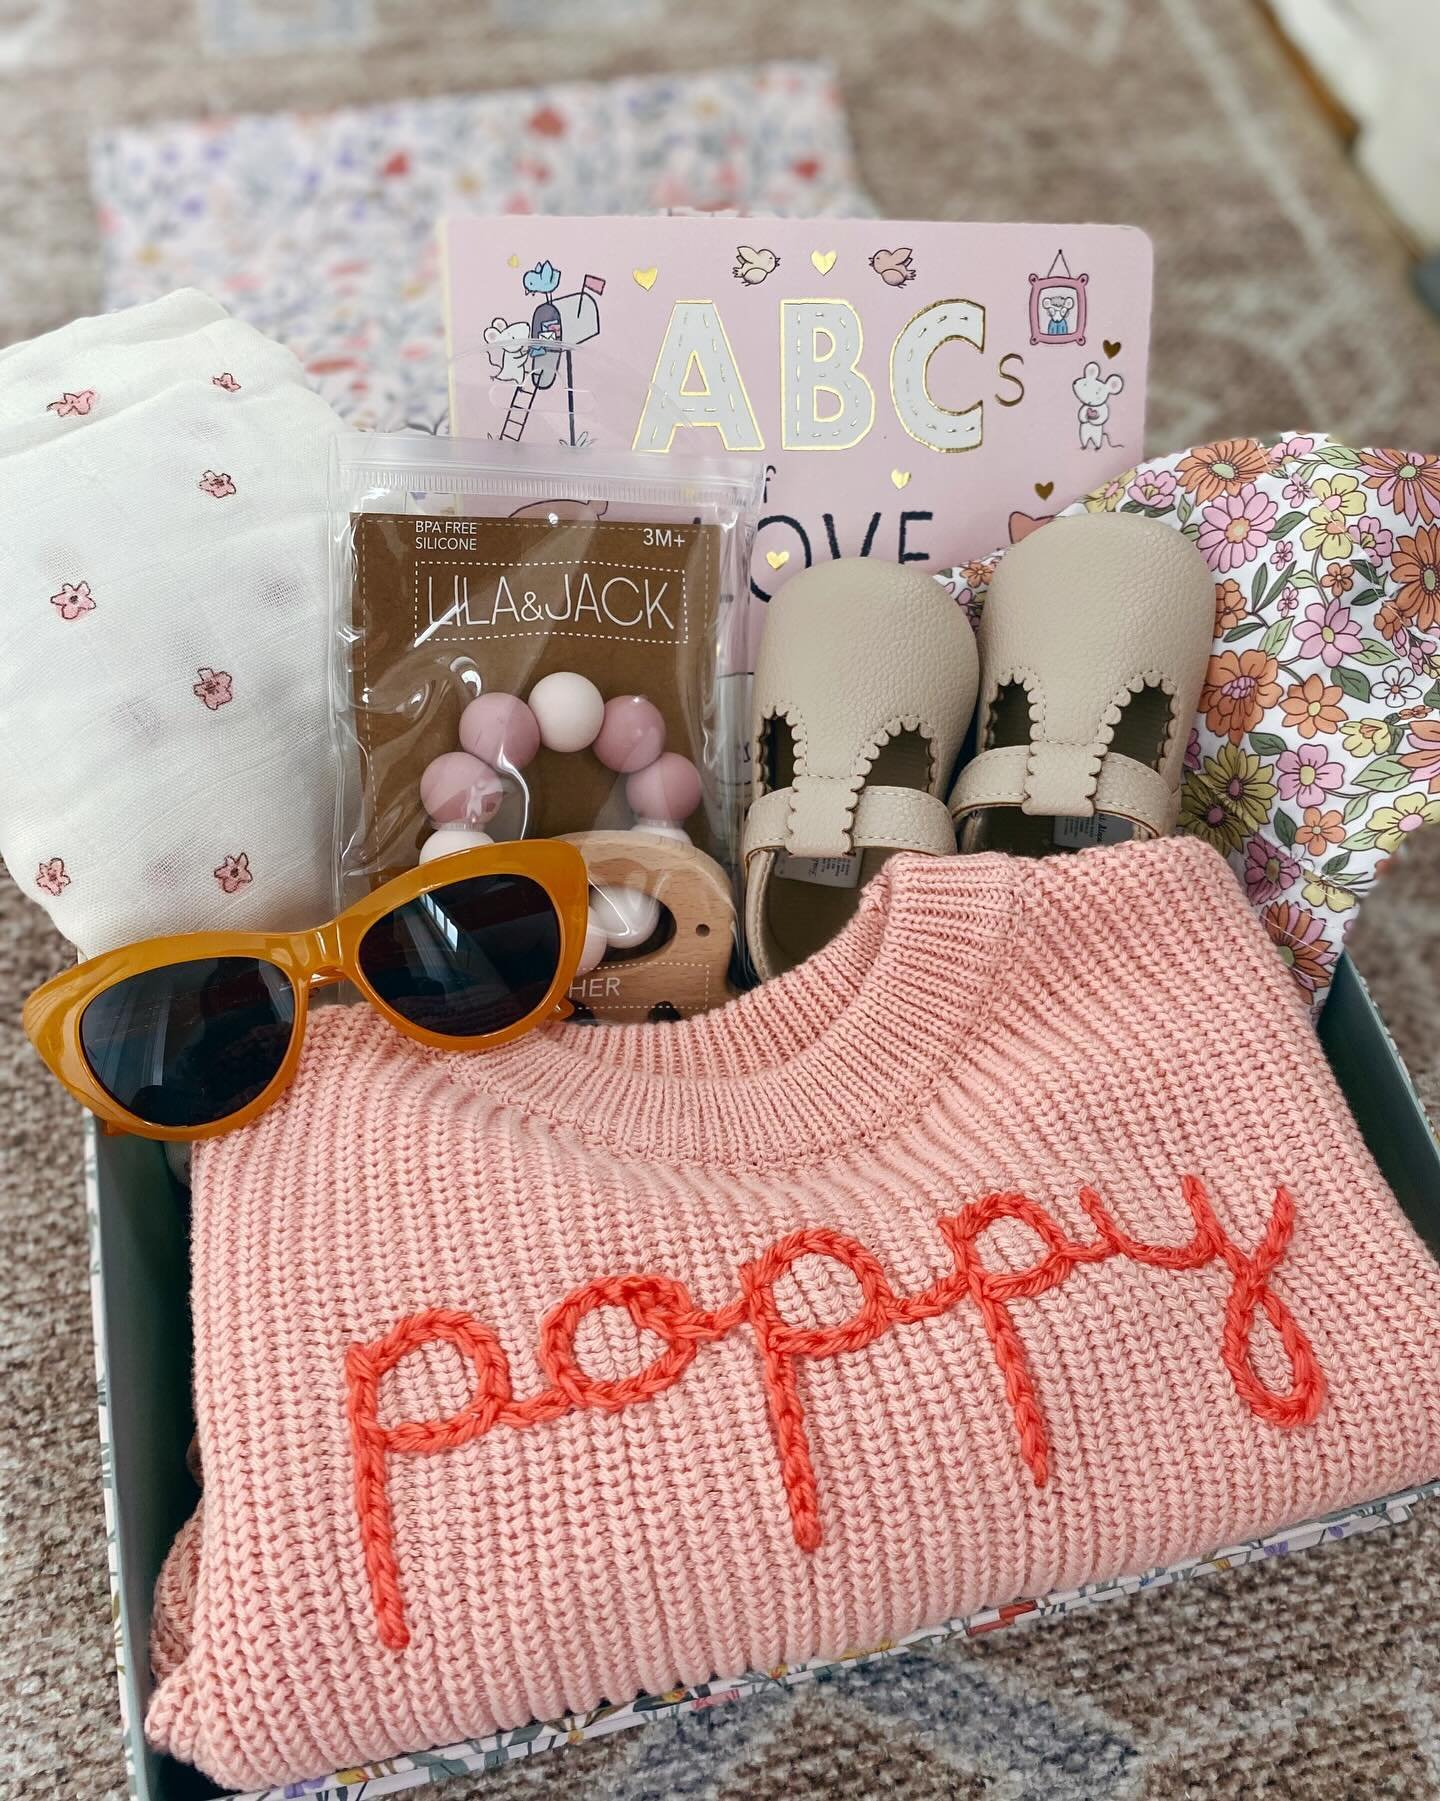 Apparel Bundle for Poppy 🌺 and yes, those are poppies on the gift box 😇 it&rsquo;s all in the details! 

Welcome to the world sweet girl 💕